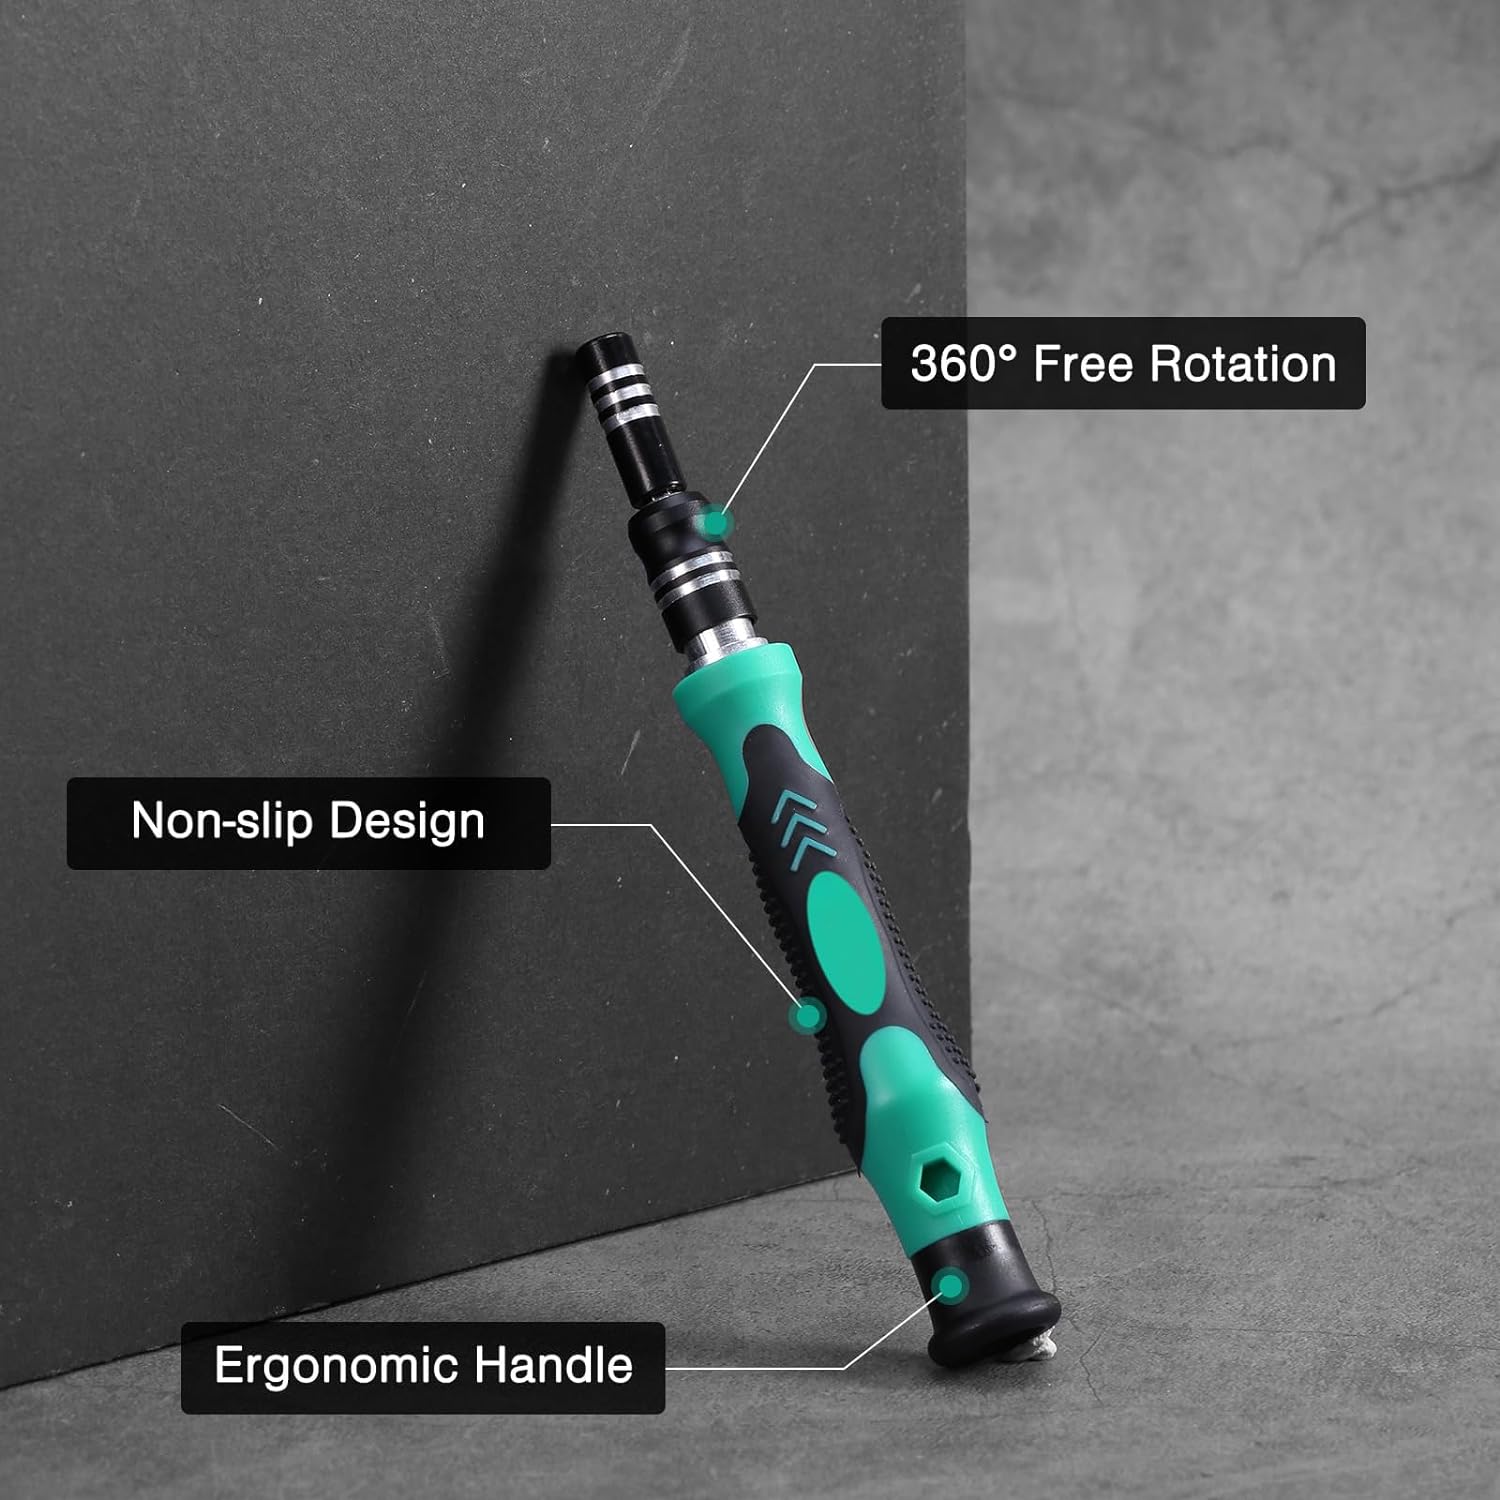 Anspect Precision Screwdrive130 in 1 with 120 bits Magnetic Screwdriver Bit Kit